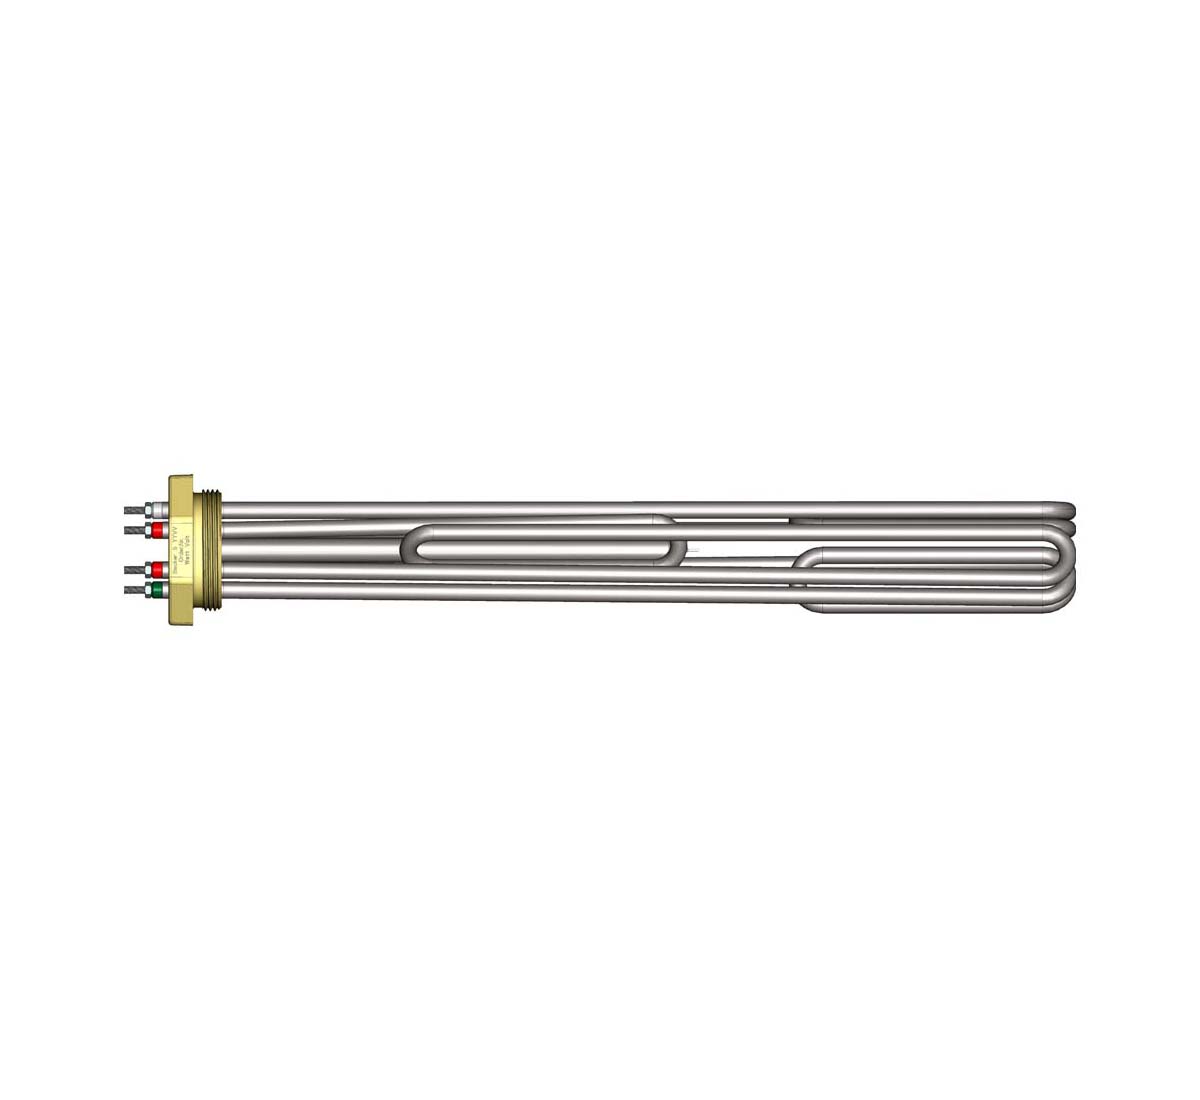 A picture of a Backer immersion heaters for oil heating with element tubes in acidproof stainless steel